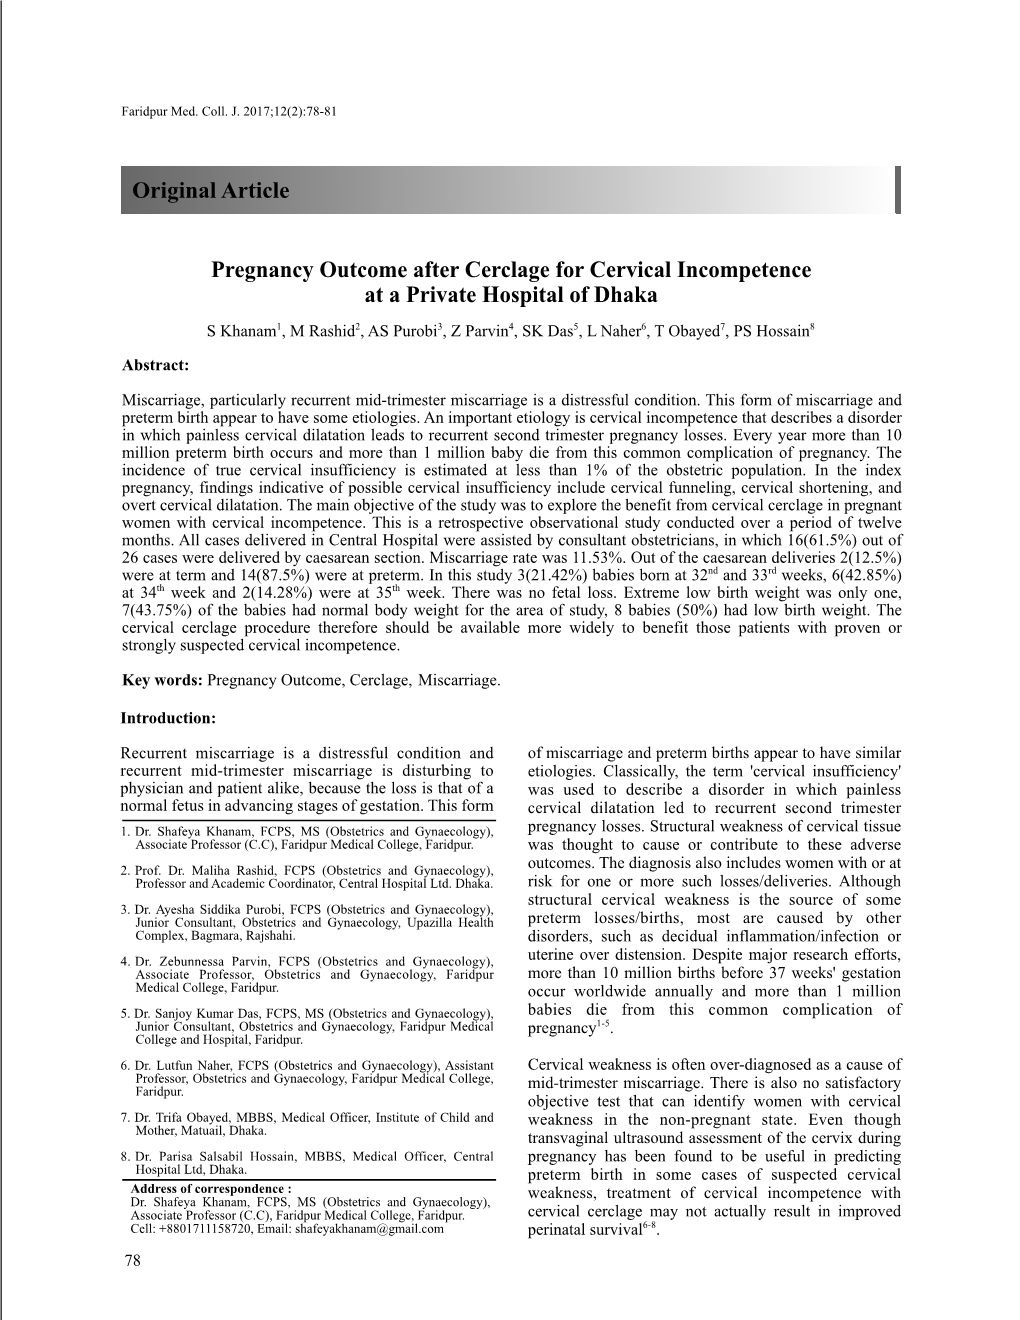 Pregnancy Outcome After Cerclage for Cervical Incompetence at a Private